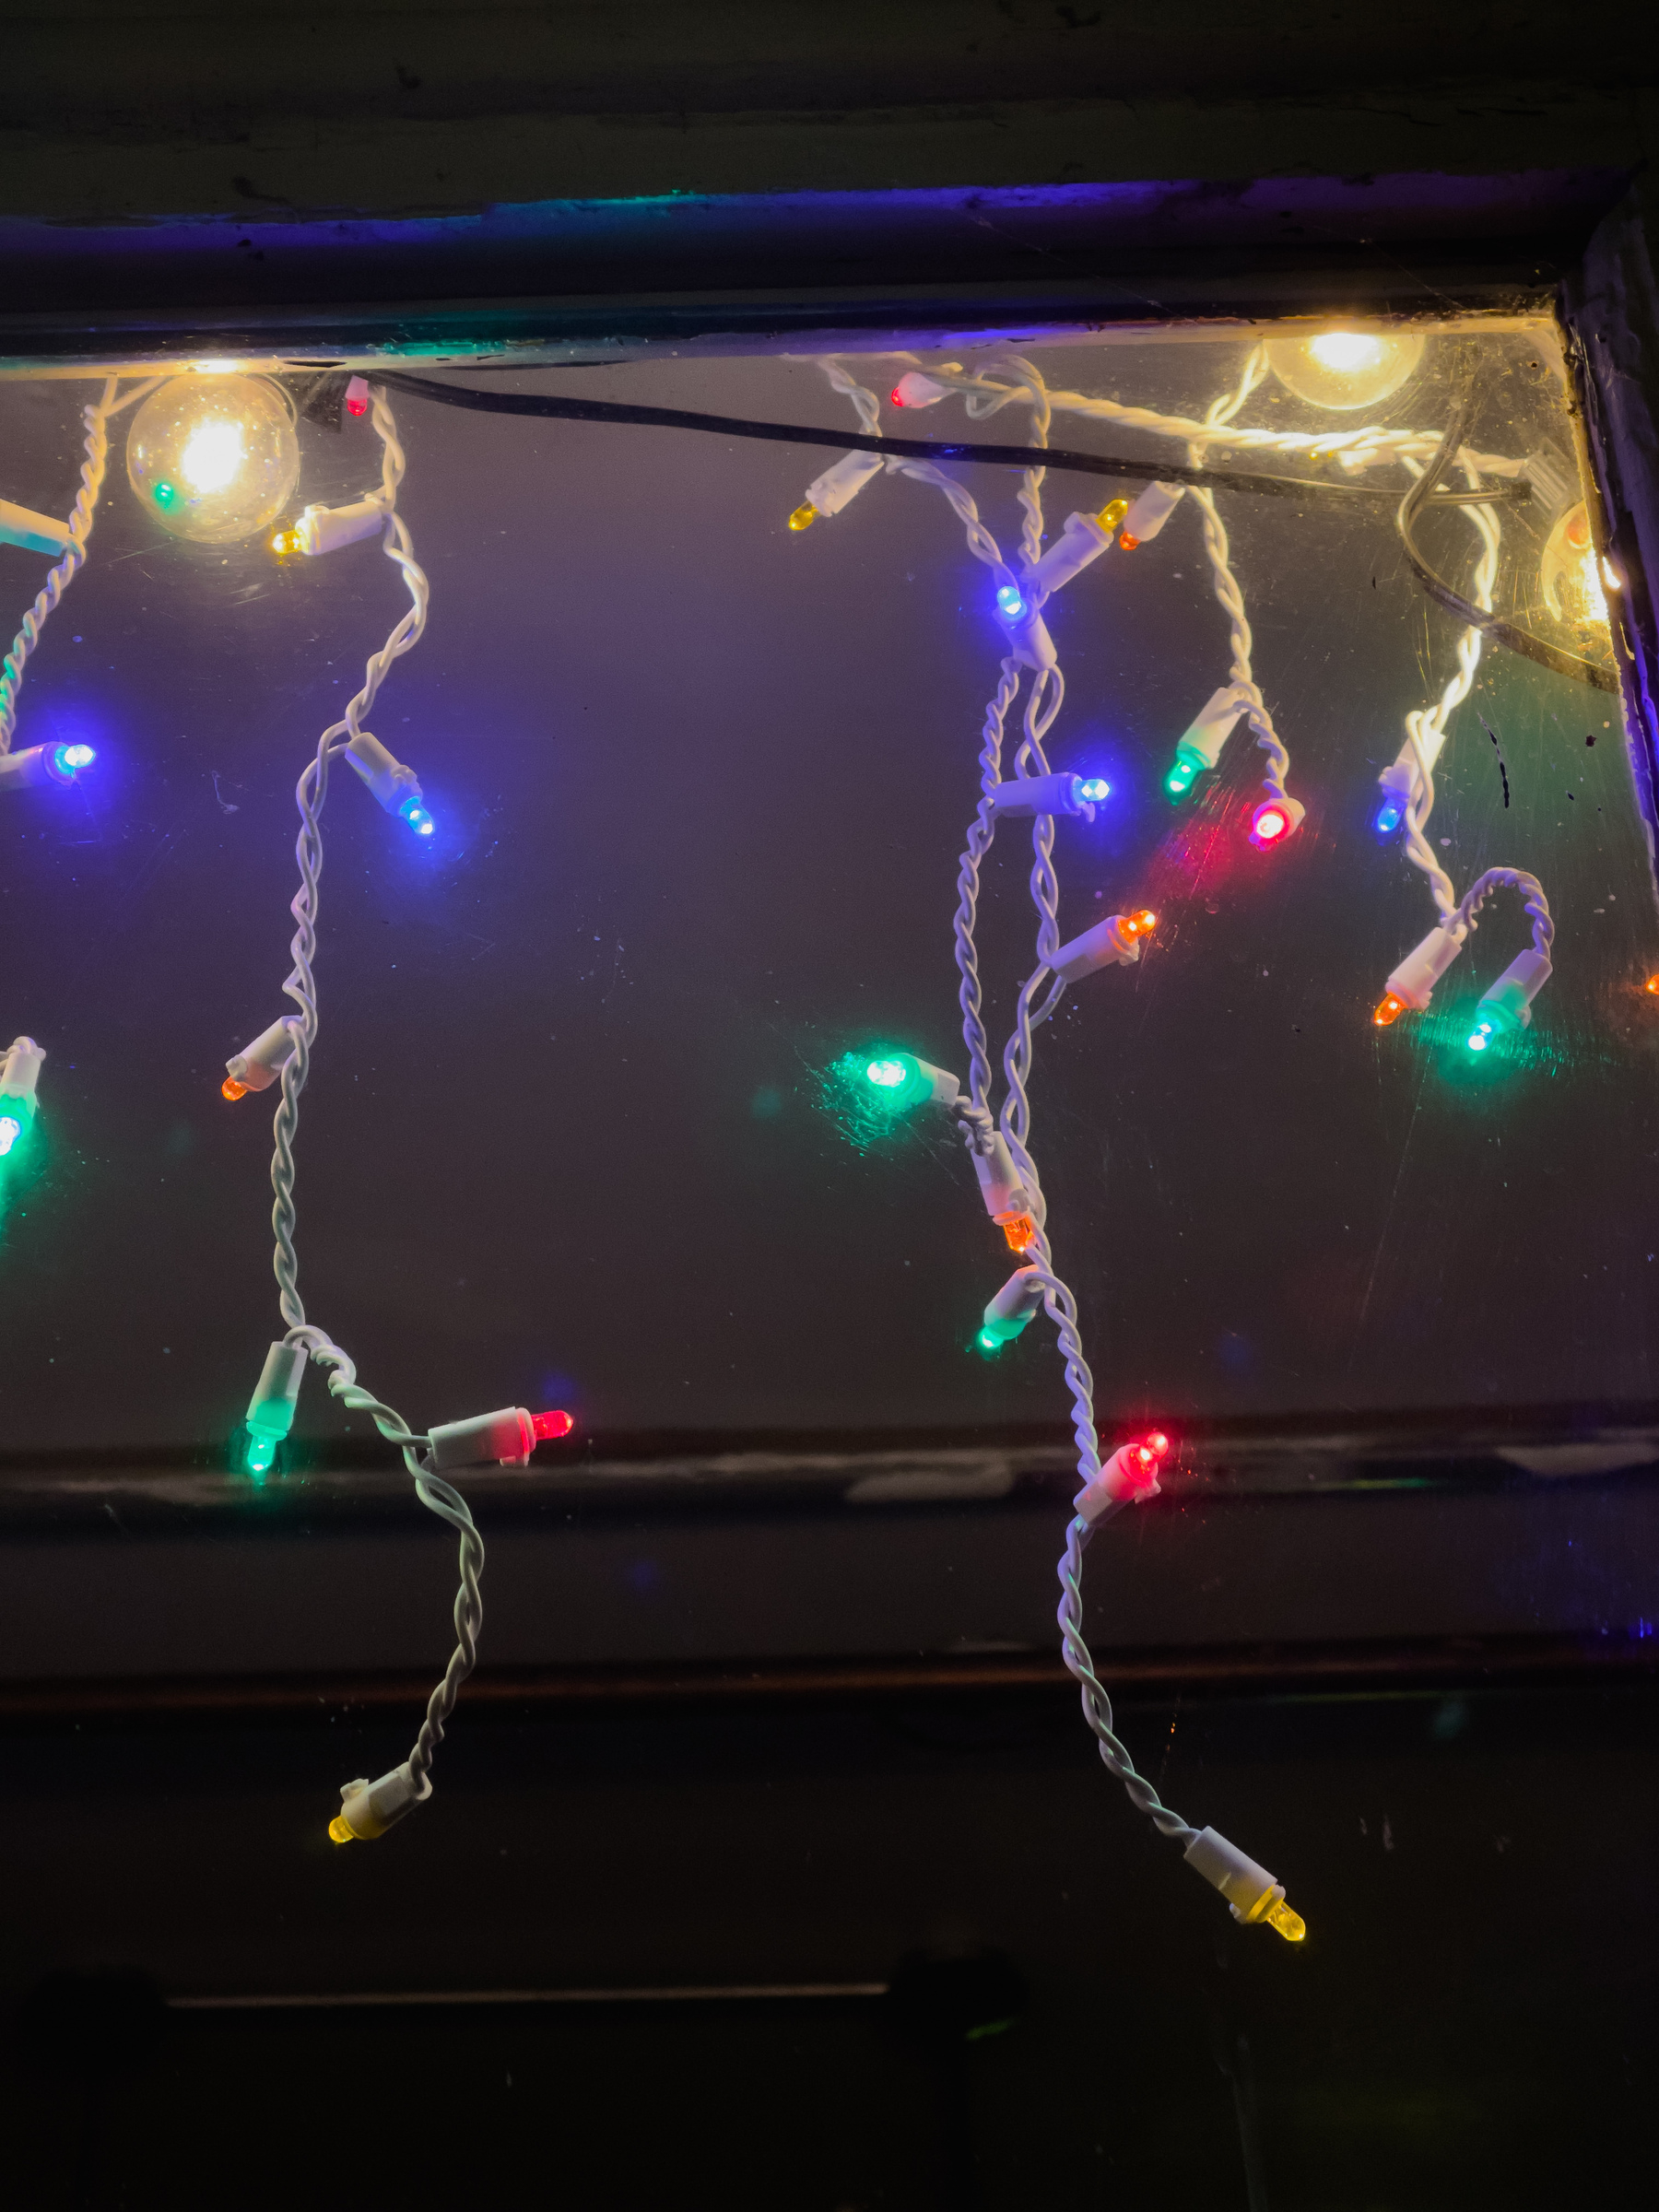 Christmas lights dangling in a shop window at night.